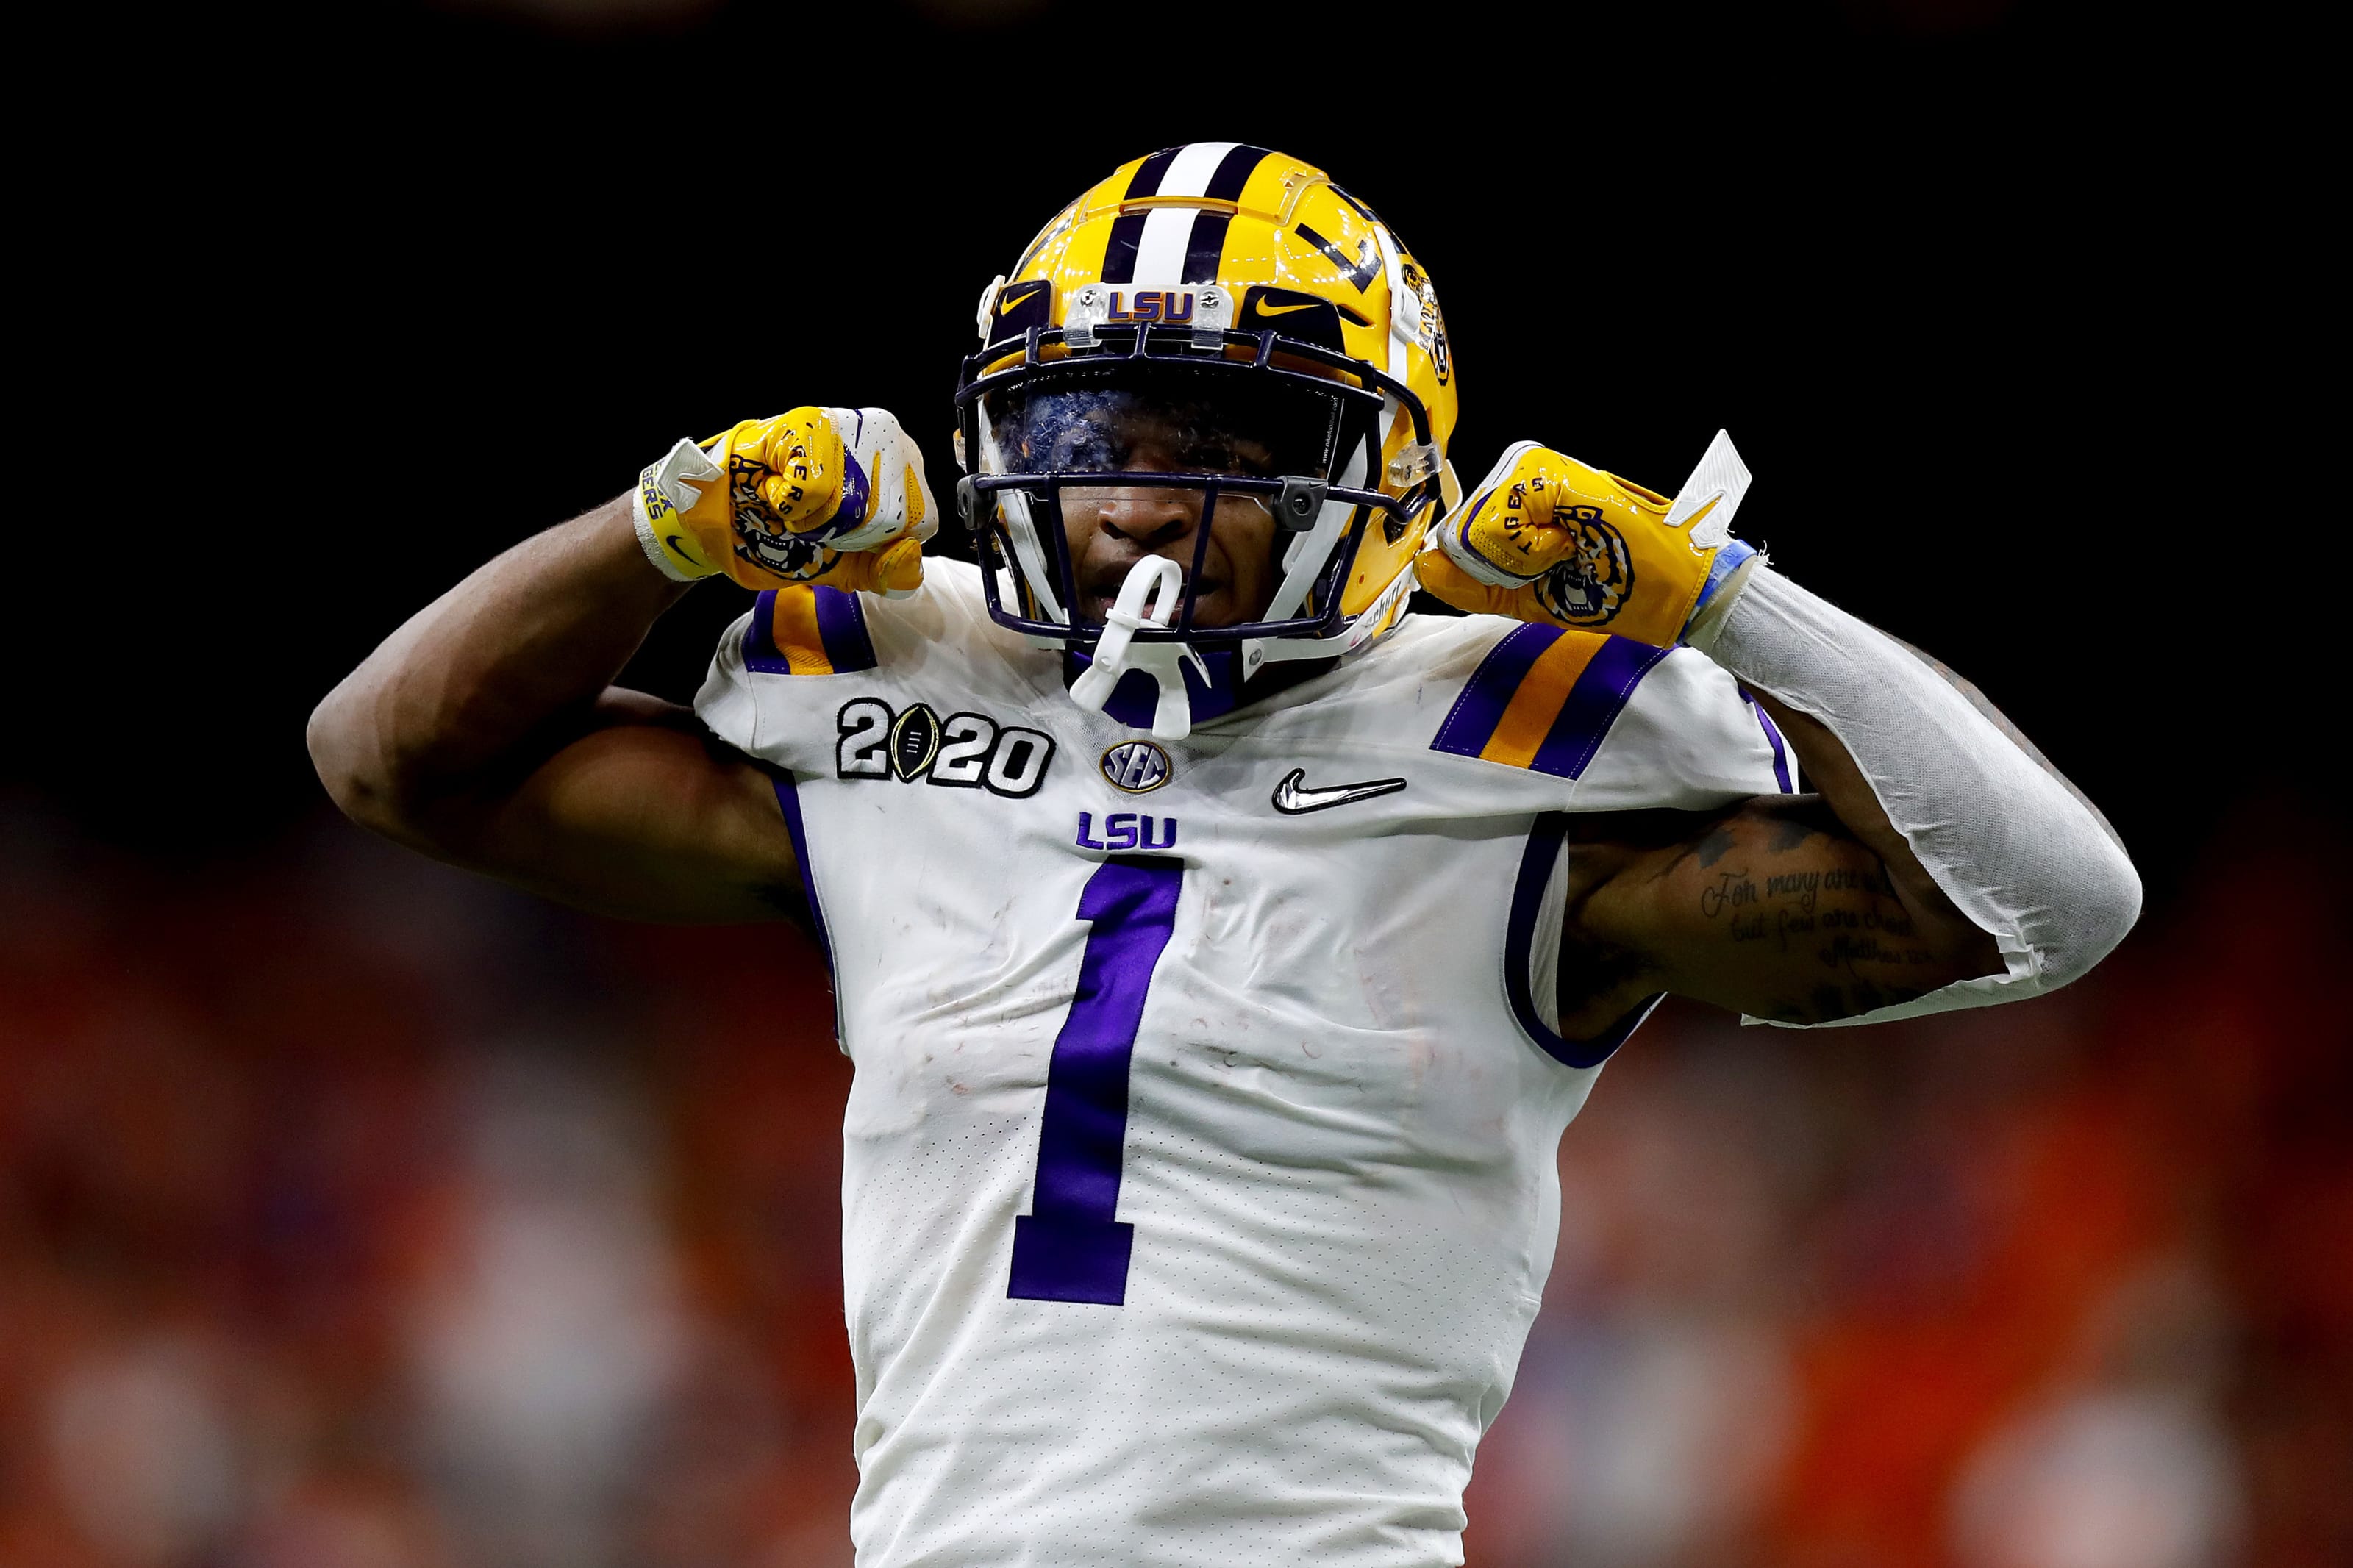 2021 NFL Draft: LSU WR Ja'Marr Chase is a top-five talent - Page 2